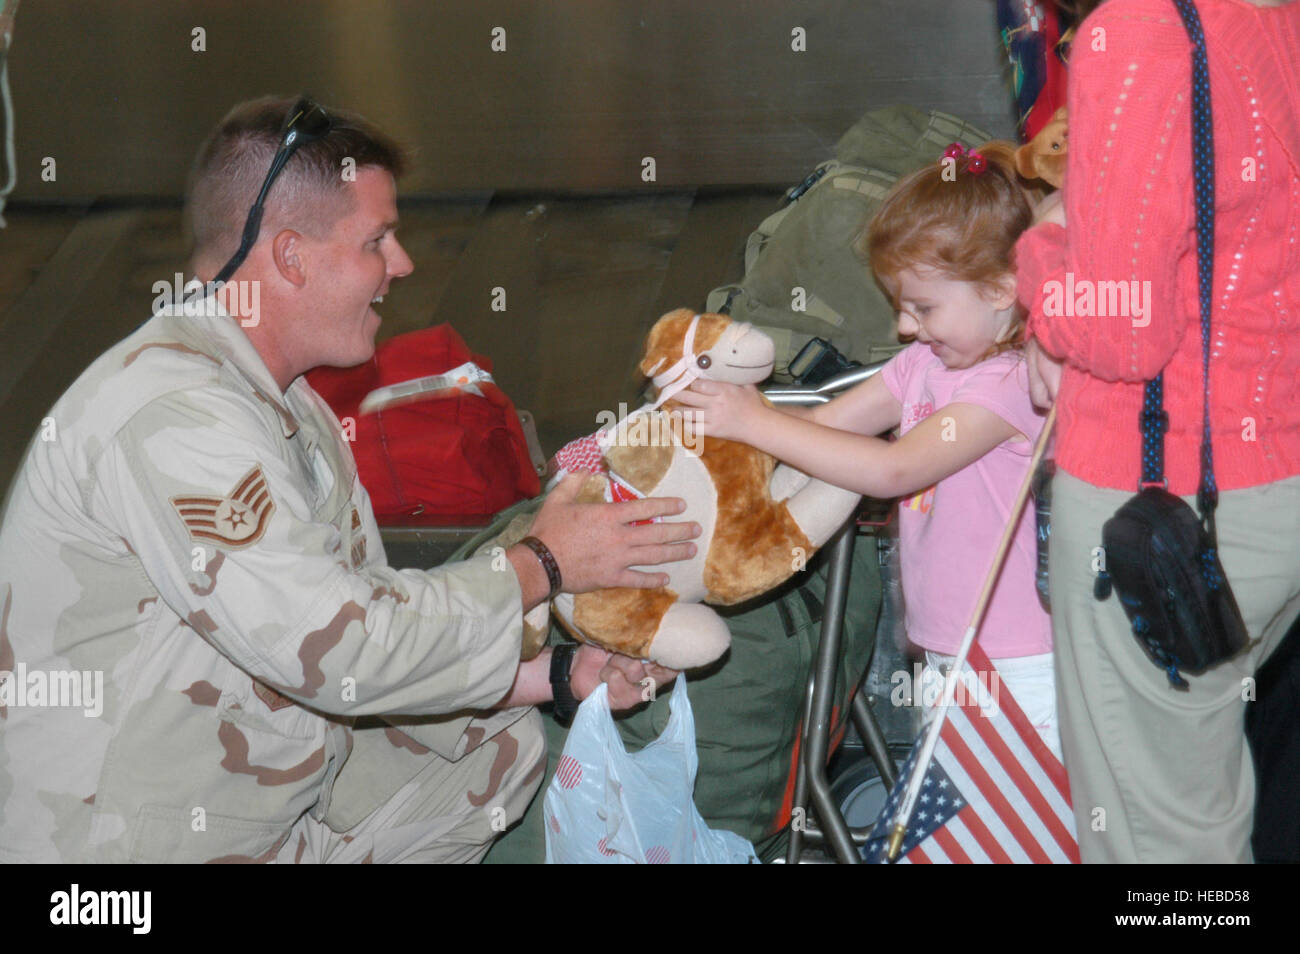 ROBINS AIR FORCE BASE, Georgia -- Staff Sgt Russell Davis presents his daughter with a stuffed camel upon his return from Iraq.  Staff Sgt Davis is a Georgia Air National Guard member from the 116th Security Forces Squadron deployed for 8 months by the 116th Air Control Wing, Robins Air Force Base, Georgia.  (Official Georgia Air National Guard photo by Master Sgt Rick Cowan) Stock Photo